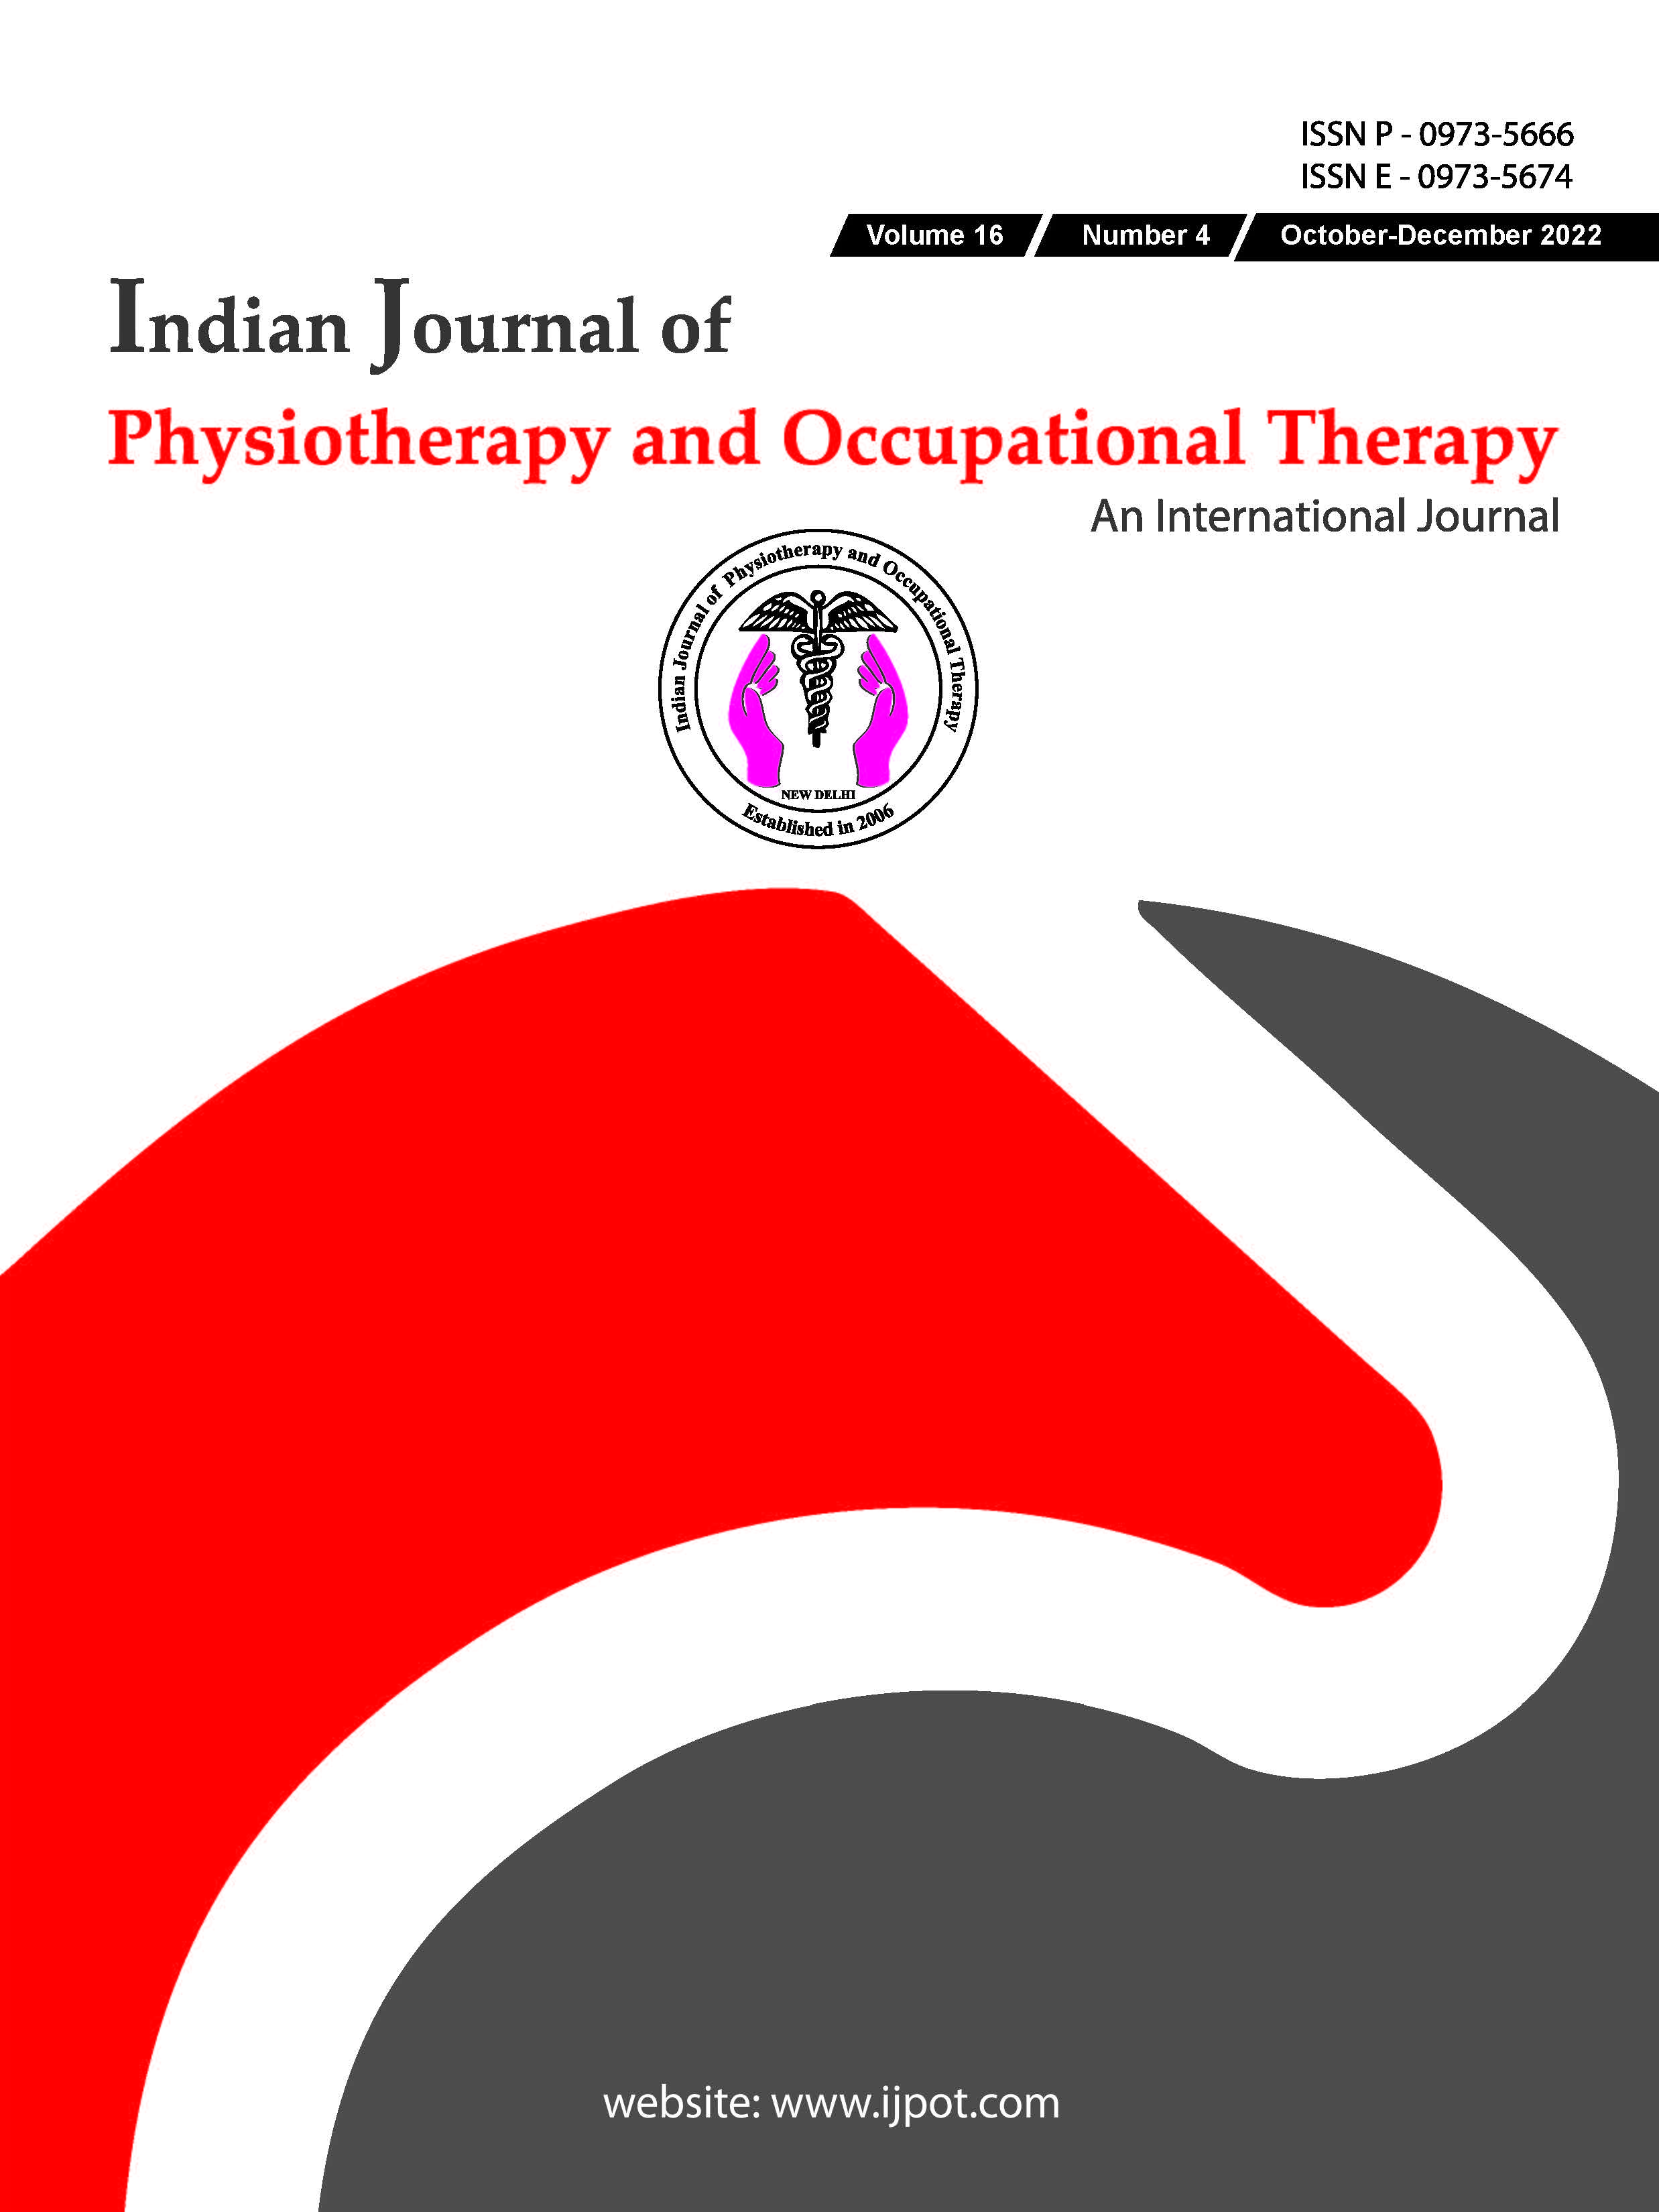 					View Vol. 16 No. 4 (2022): Indian Journal of Physiotherapy and Occupational Therapy
				